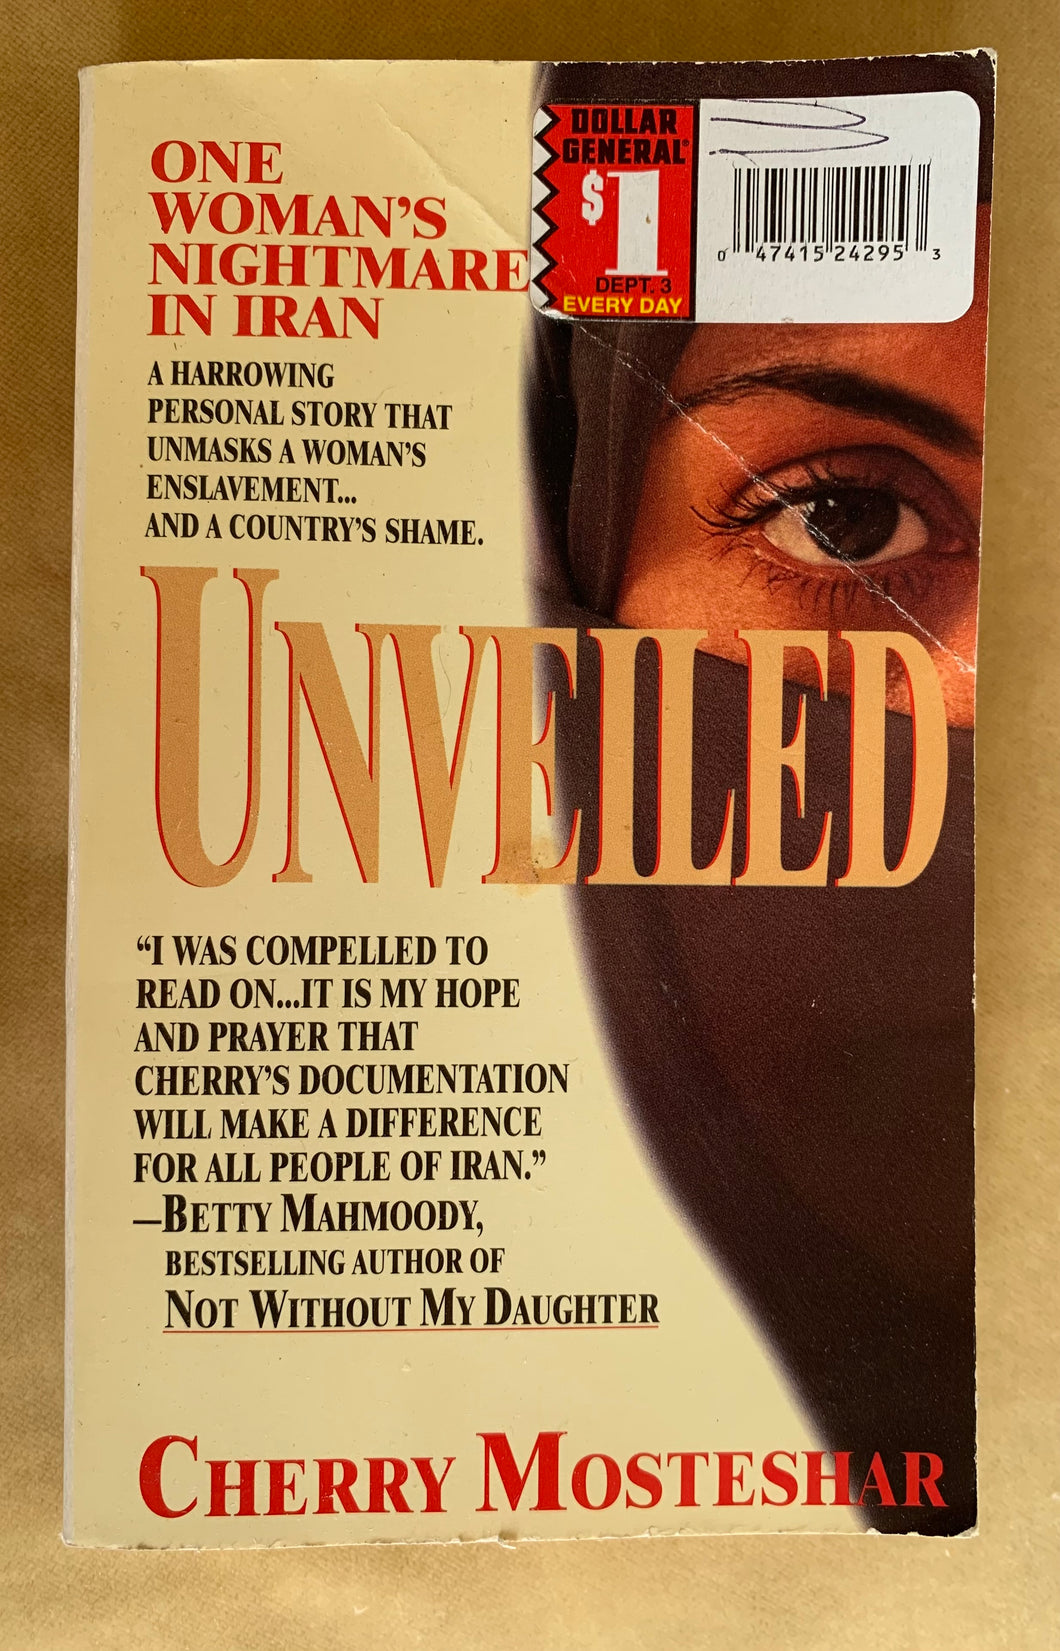 Unveiled: One Woman's Nightmare In Iran